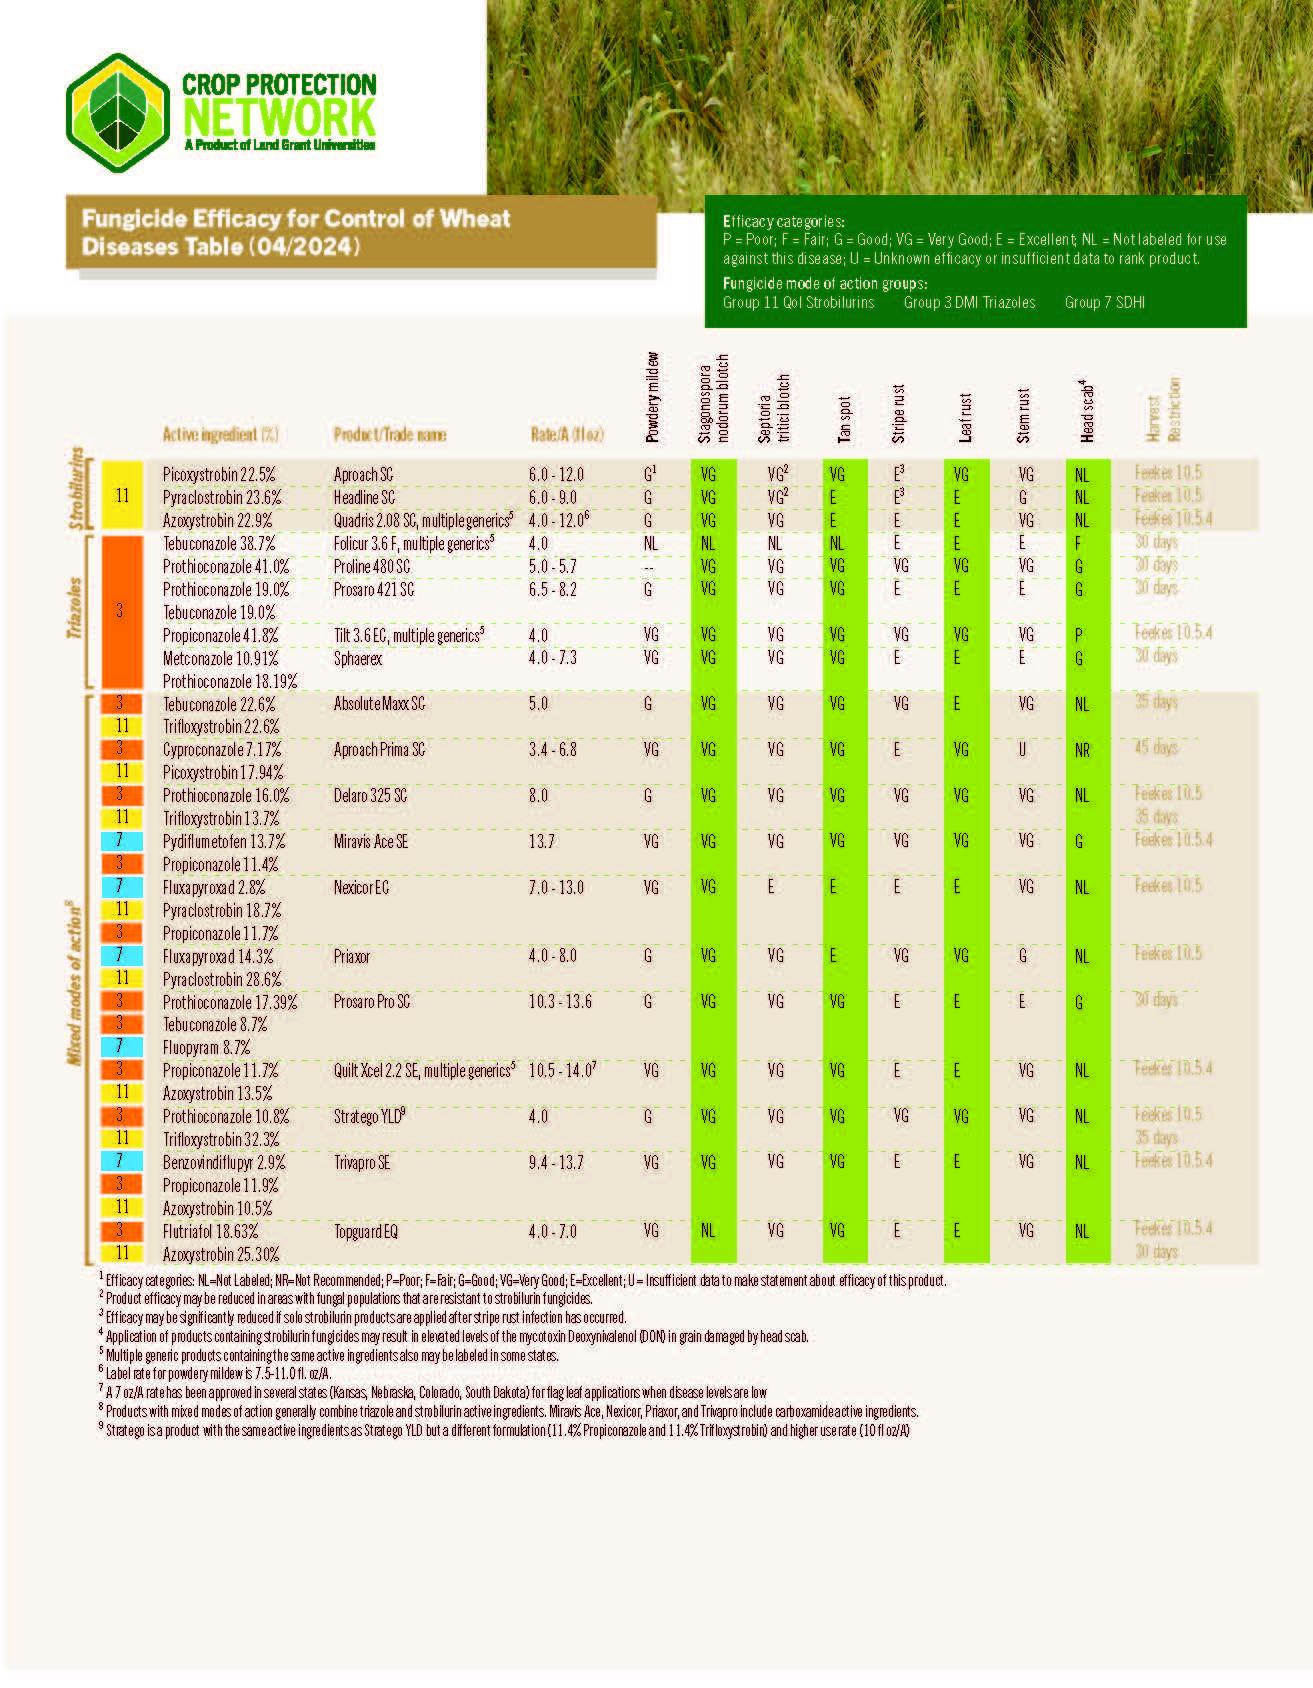 Fungicide Efficacy for Control of Wheat Diseases Table-page 2